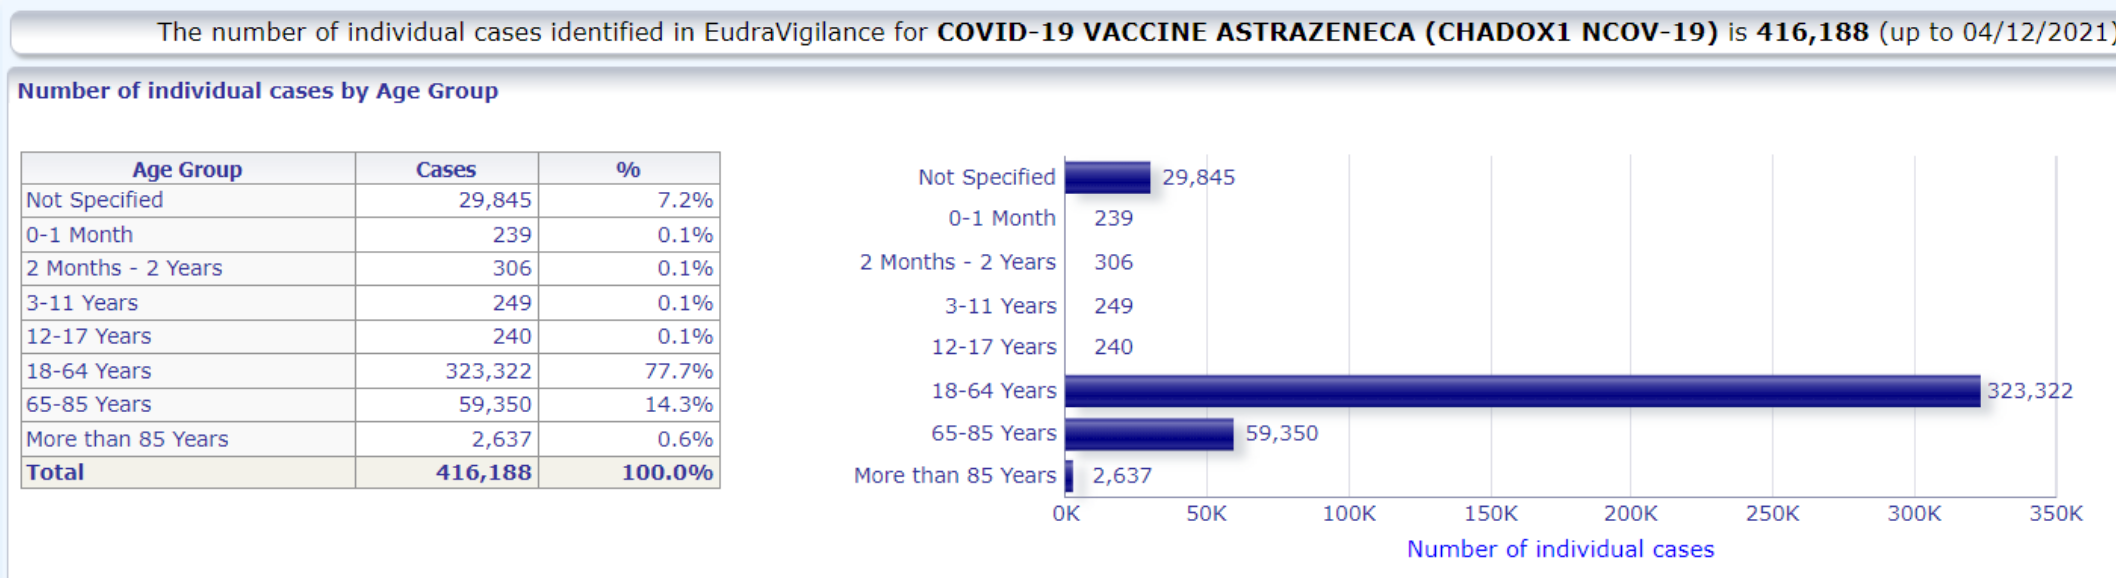 chart and graph showing vaccine reaction to Astrazeneca COVID vaccine in Europe